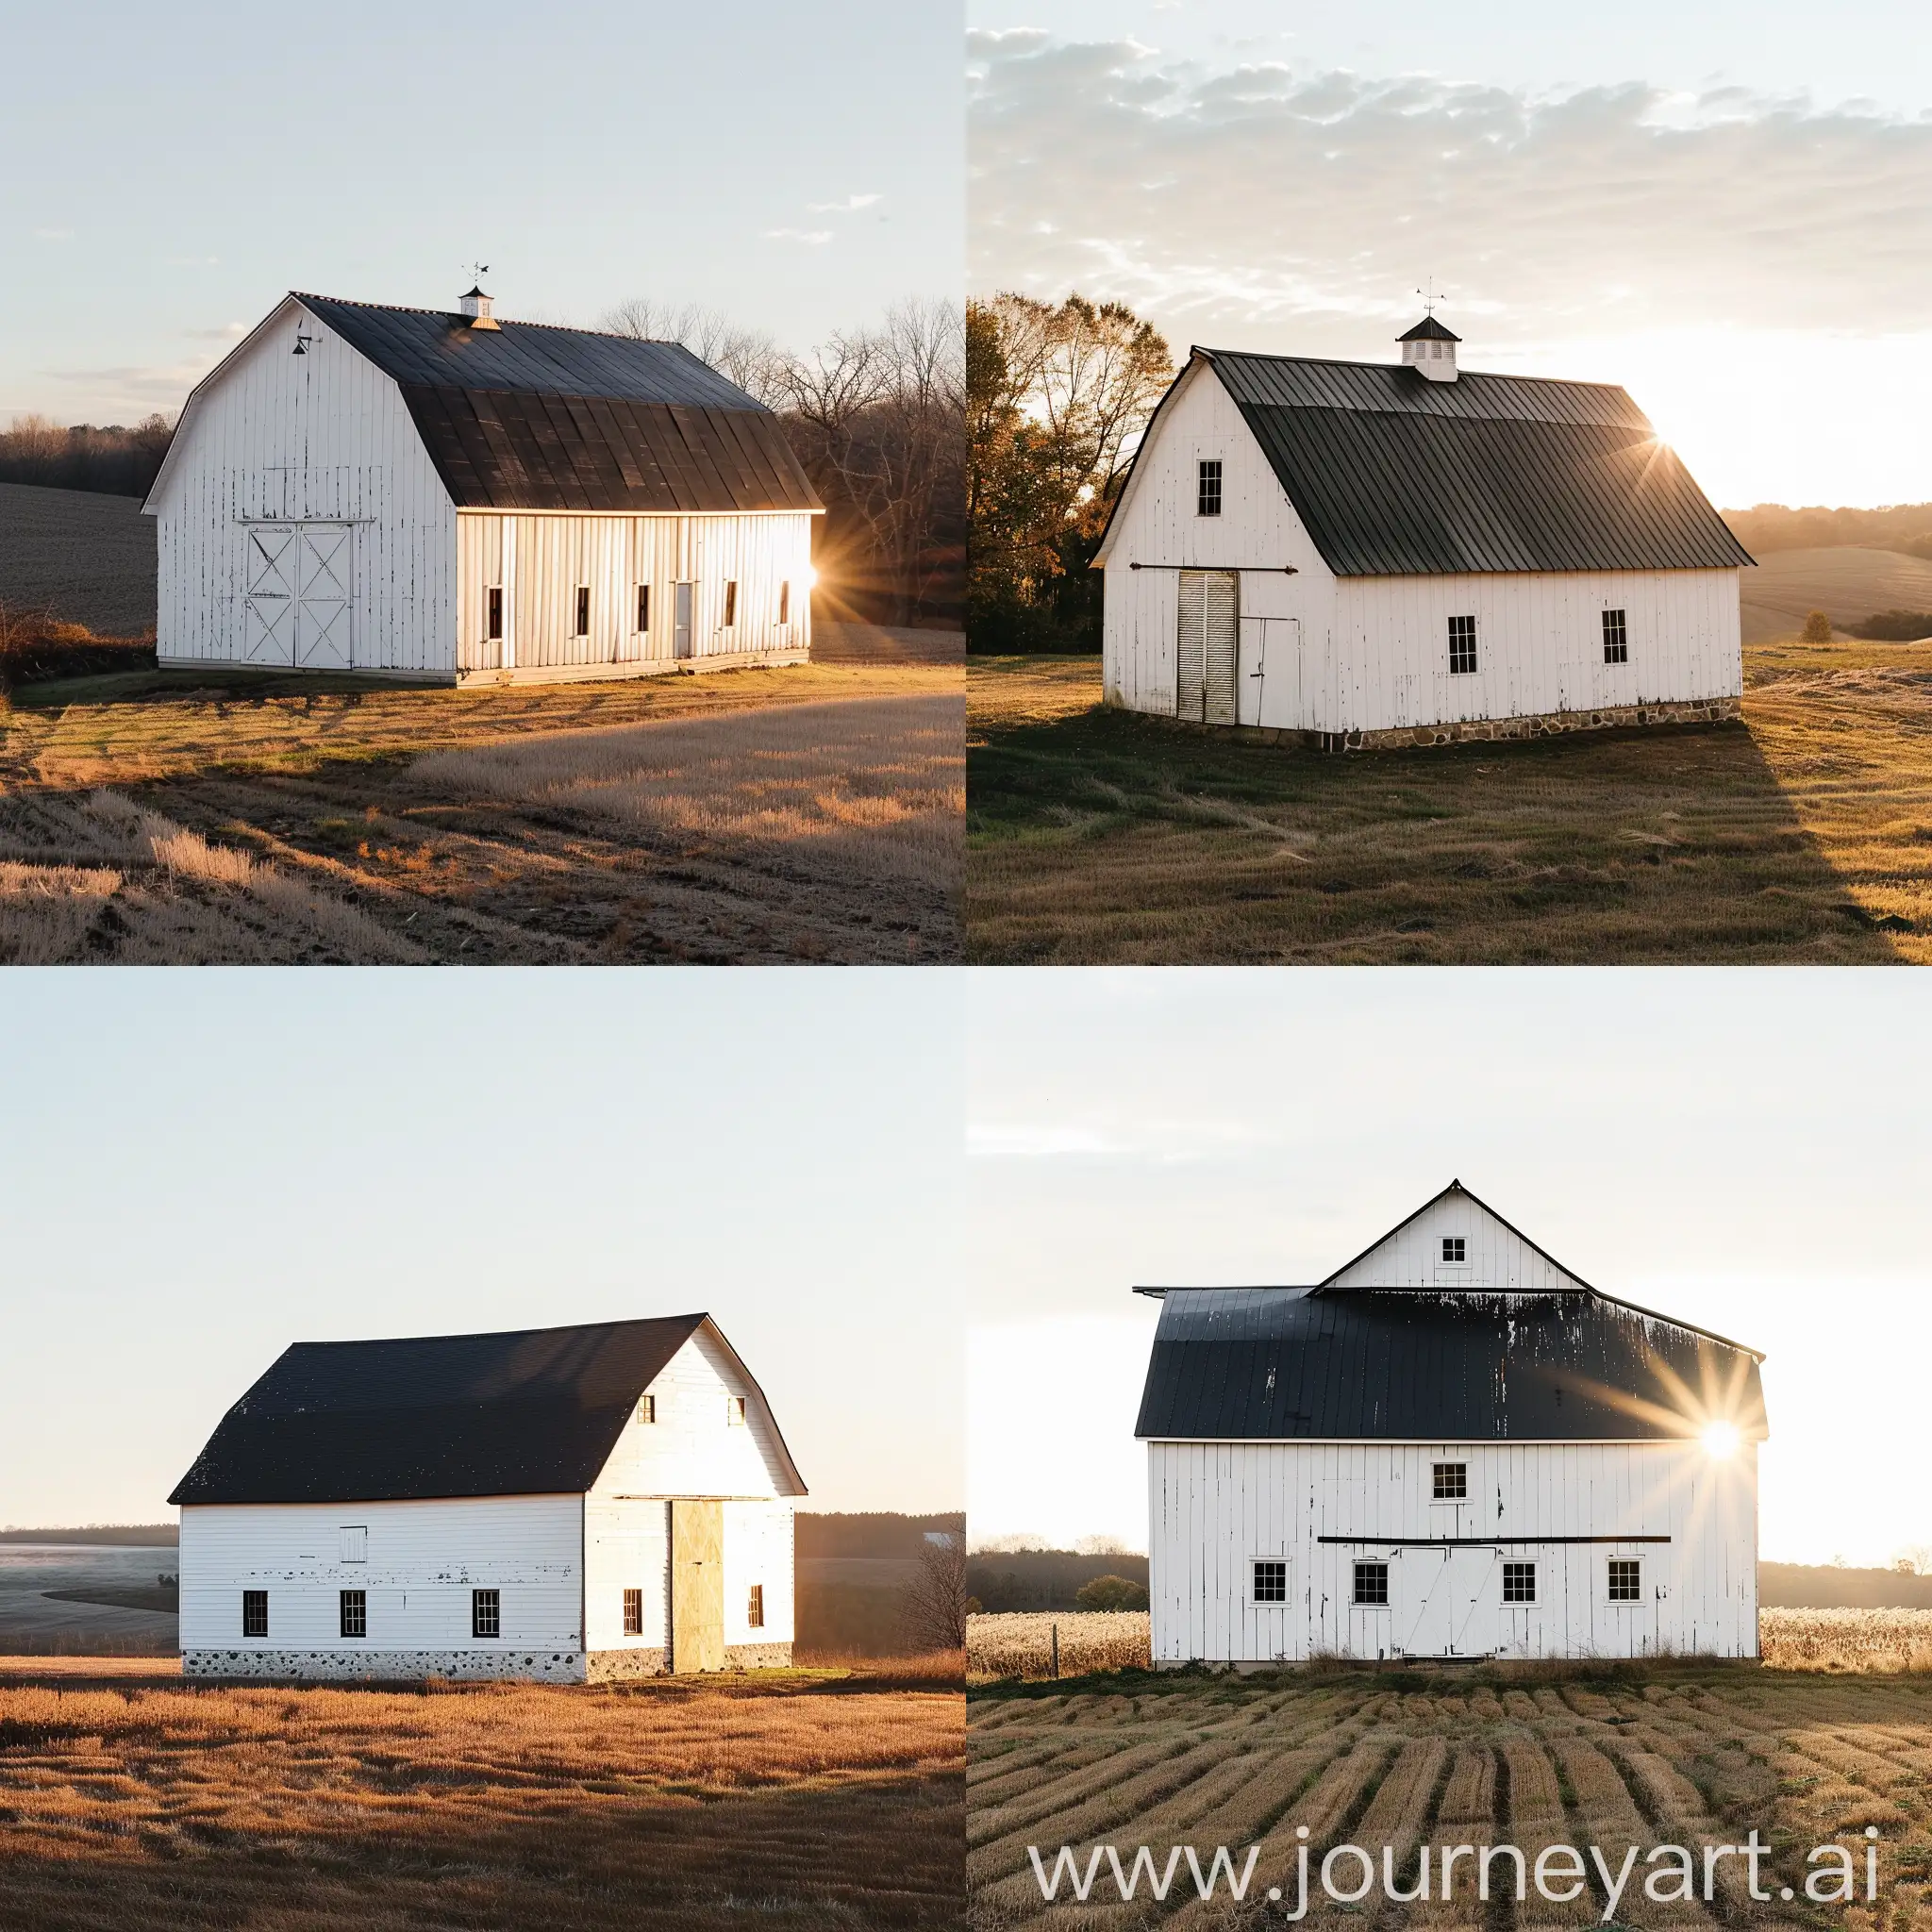 White barn with black roof in middle of field sunlight on front